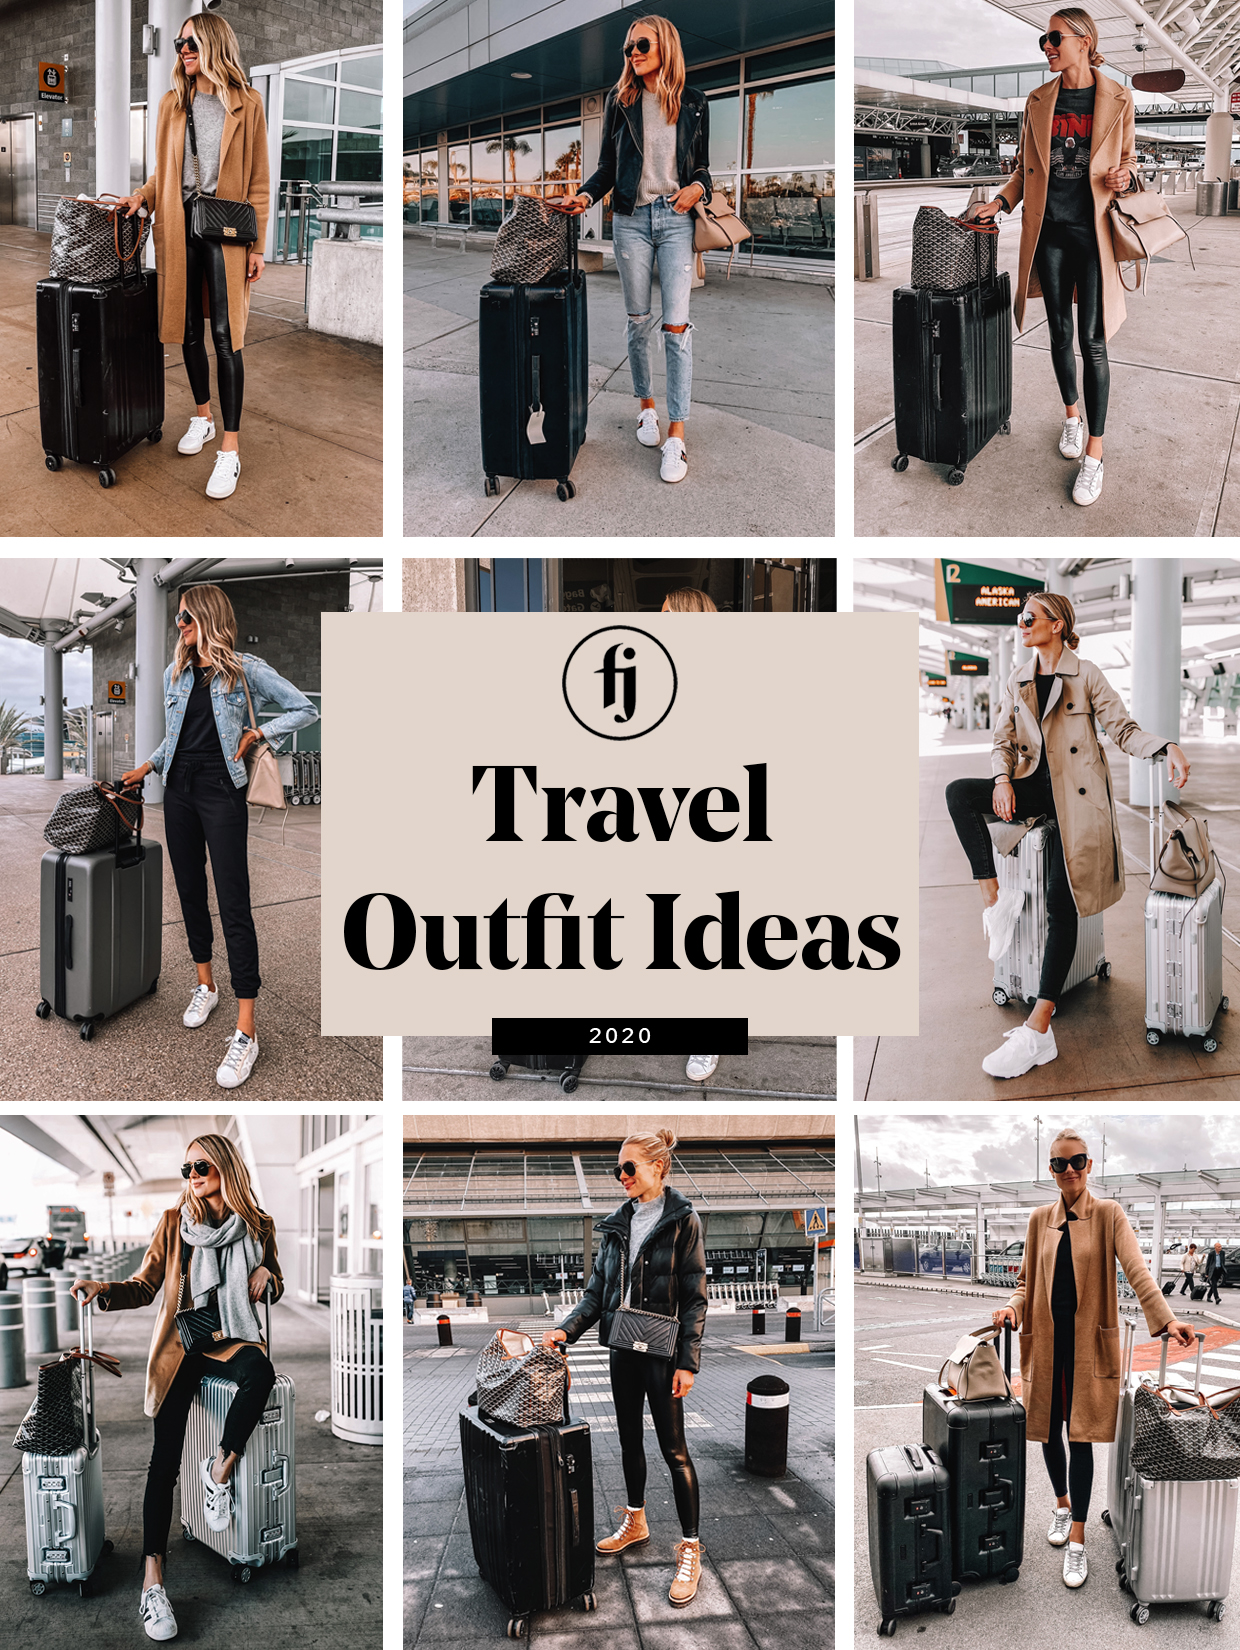 what is travel outfit